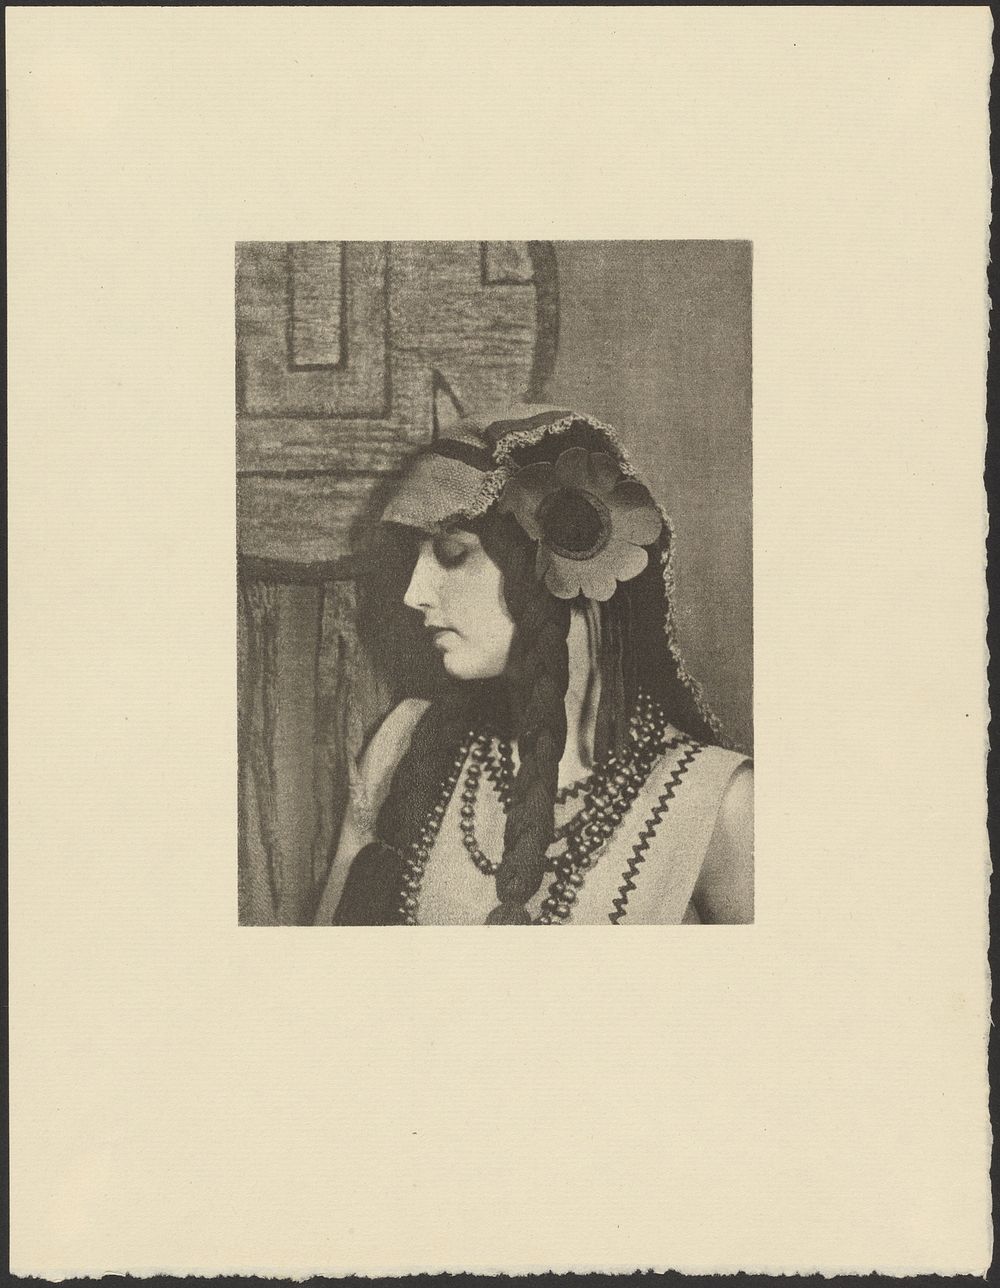 Woman in Bohemian Outfit with Large Flower in Hair by Arthur F Kales